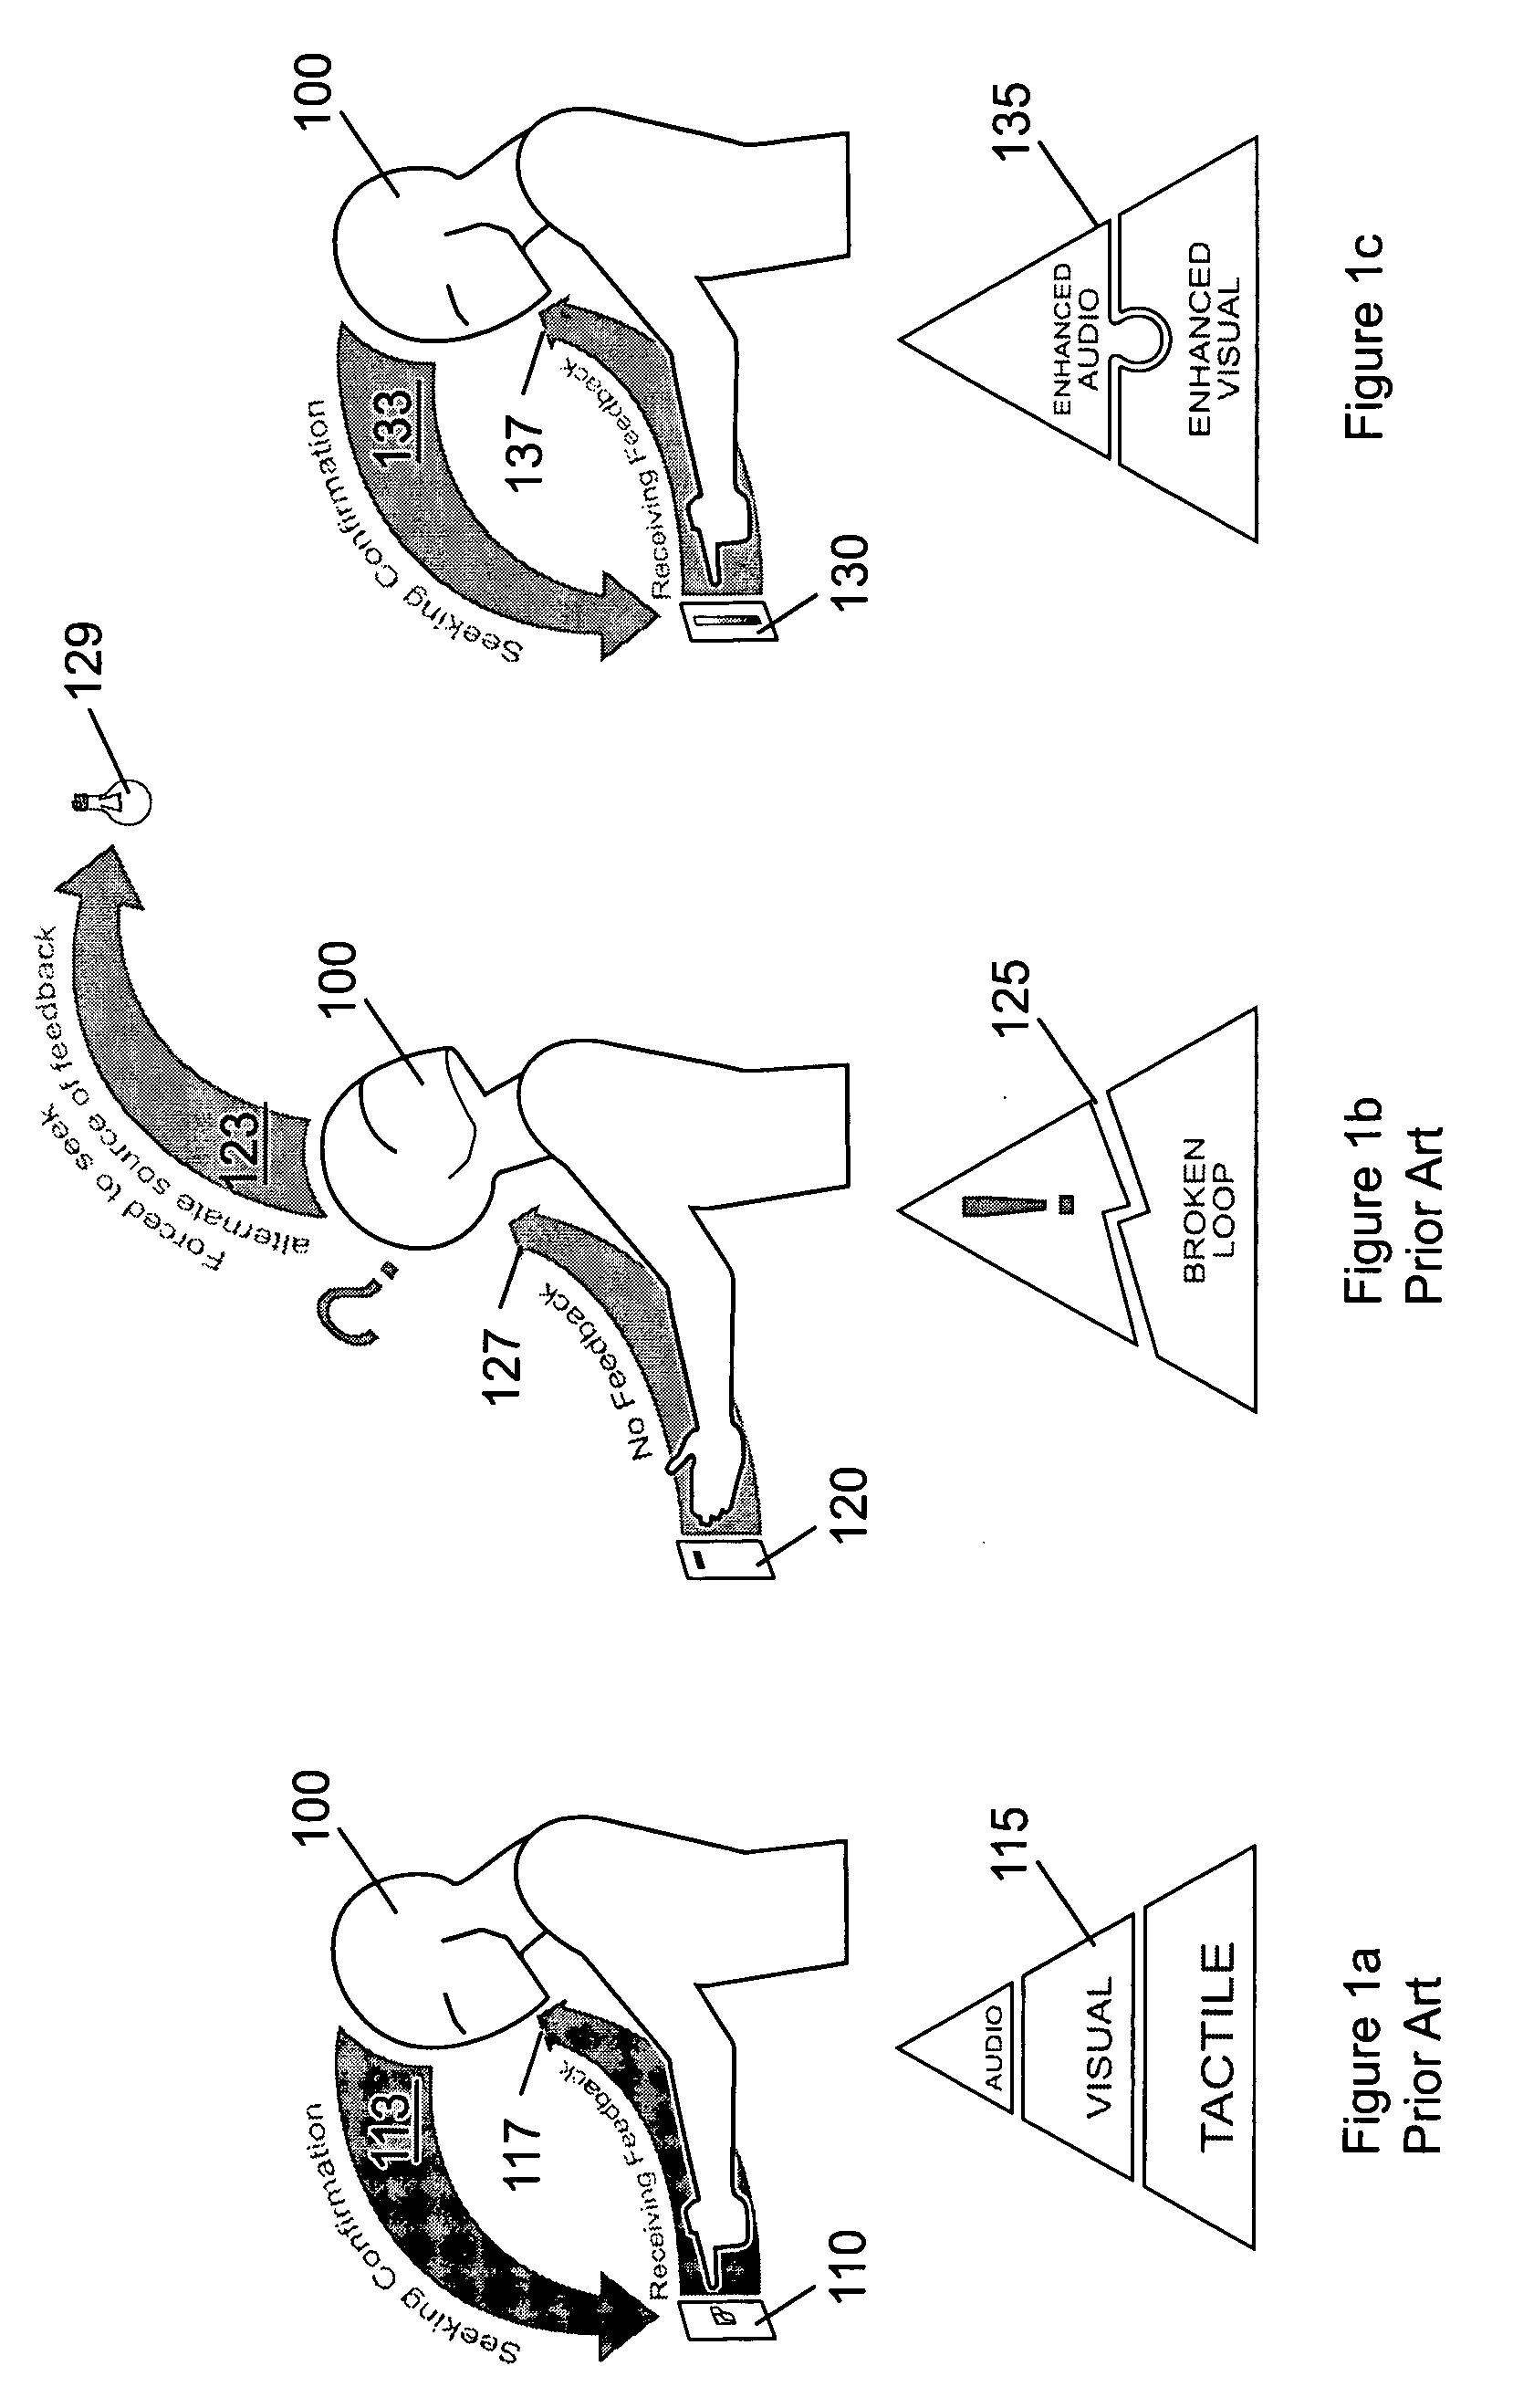 Sensory feedback systems for non-contact electrical switches